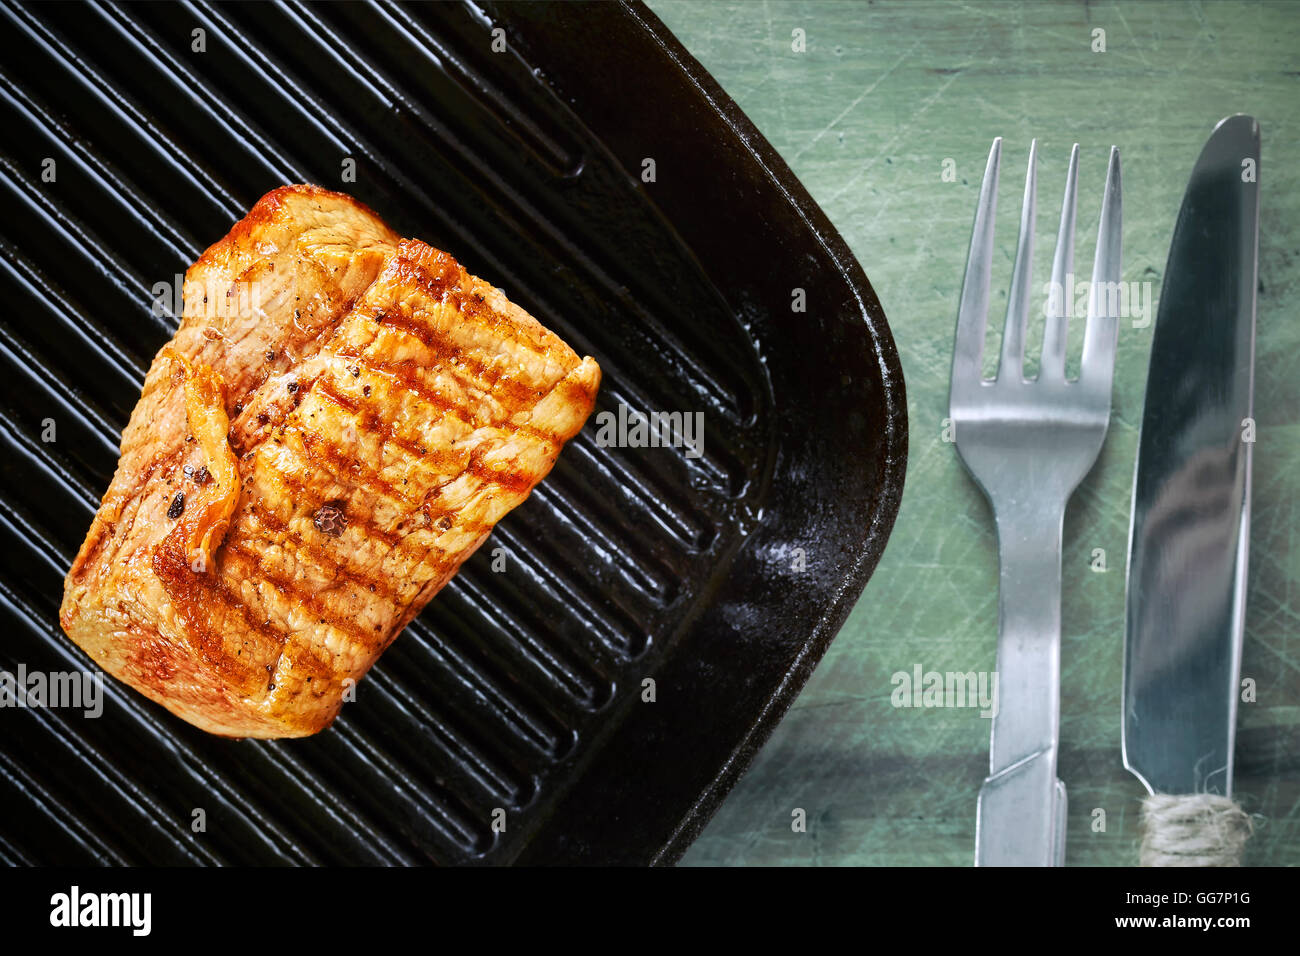 Close up picture of a roasted pork loin in black pan on wooden table. Stock Photo